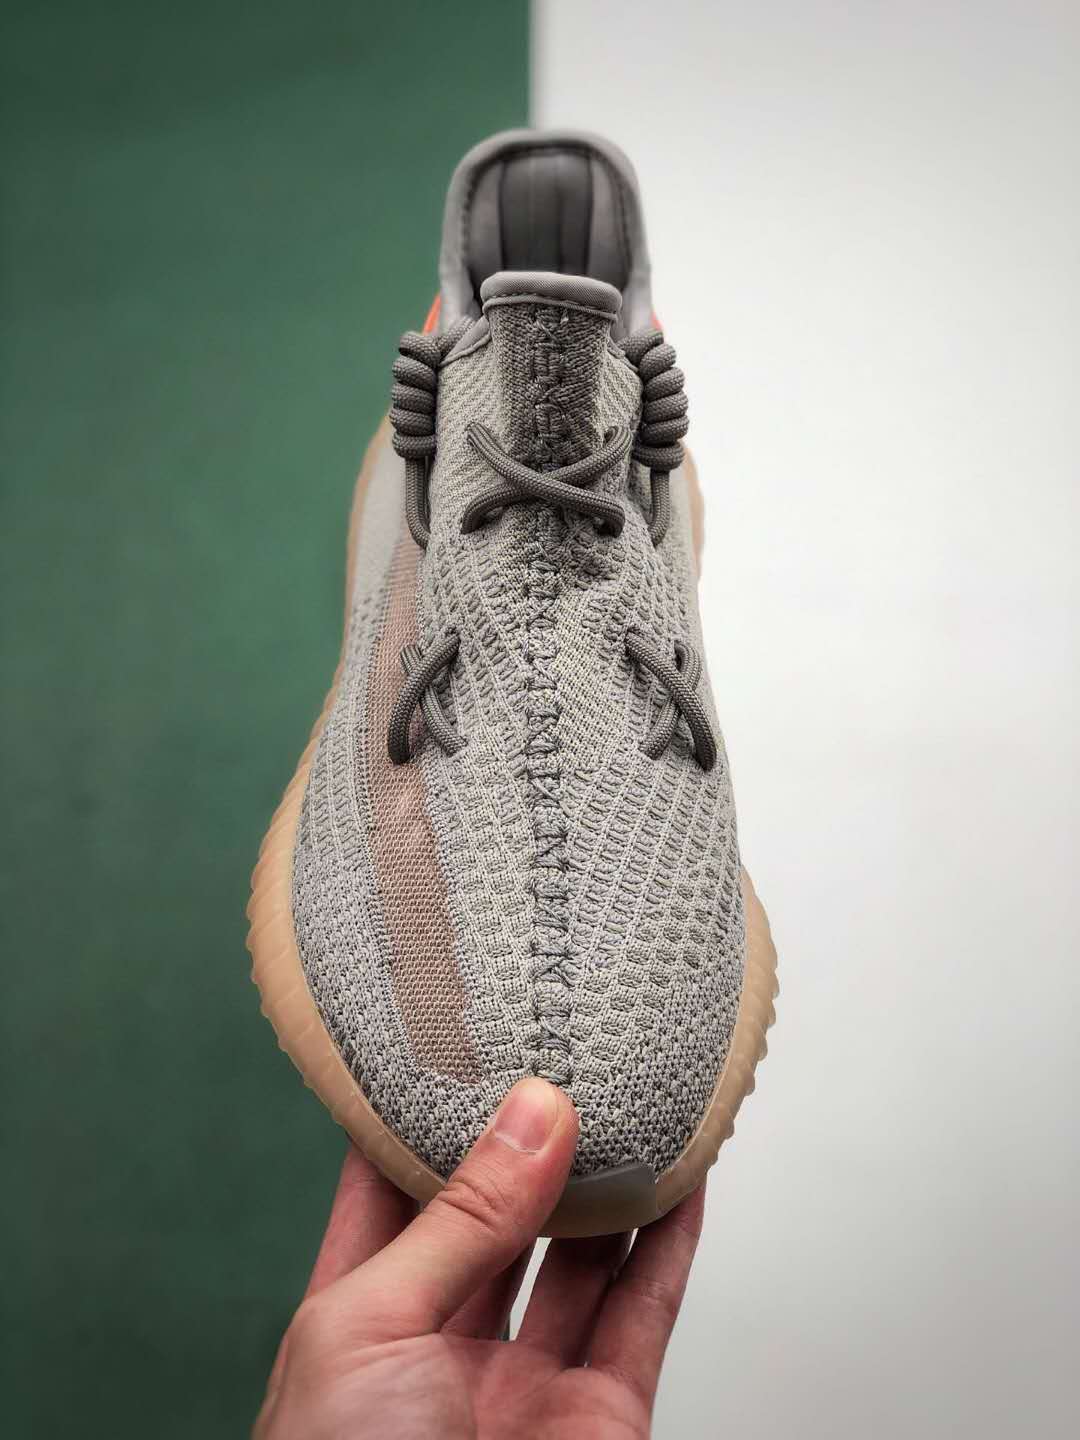 Adidas Yeezy Boost 350 V2 Trfrm EG7492 - Get the Latest Style and Updates